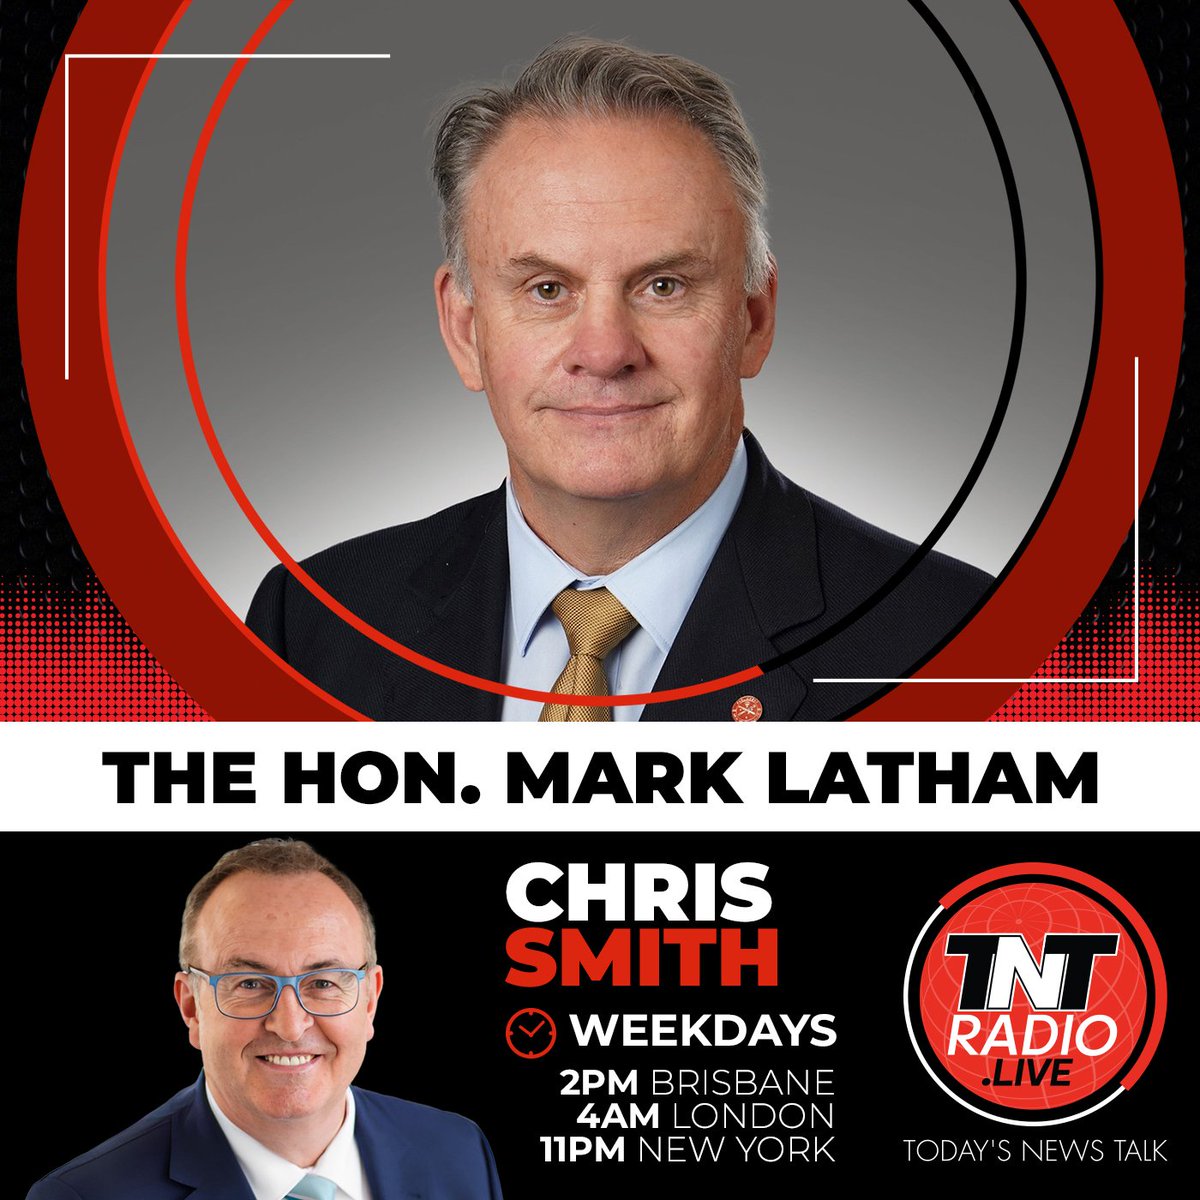 Coming up, @RealMarkLatham on boos for @AlboMP Will Tax cuts force #inflation up? More advise on #conscription PLUS #westindiescricket alive again! @tntradiolive